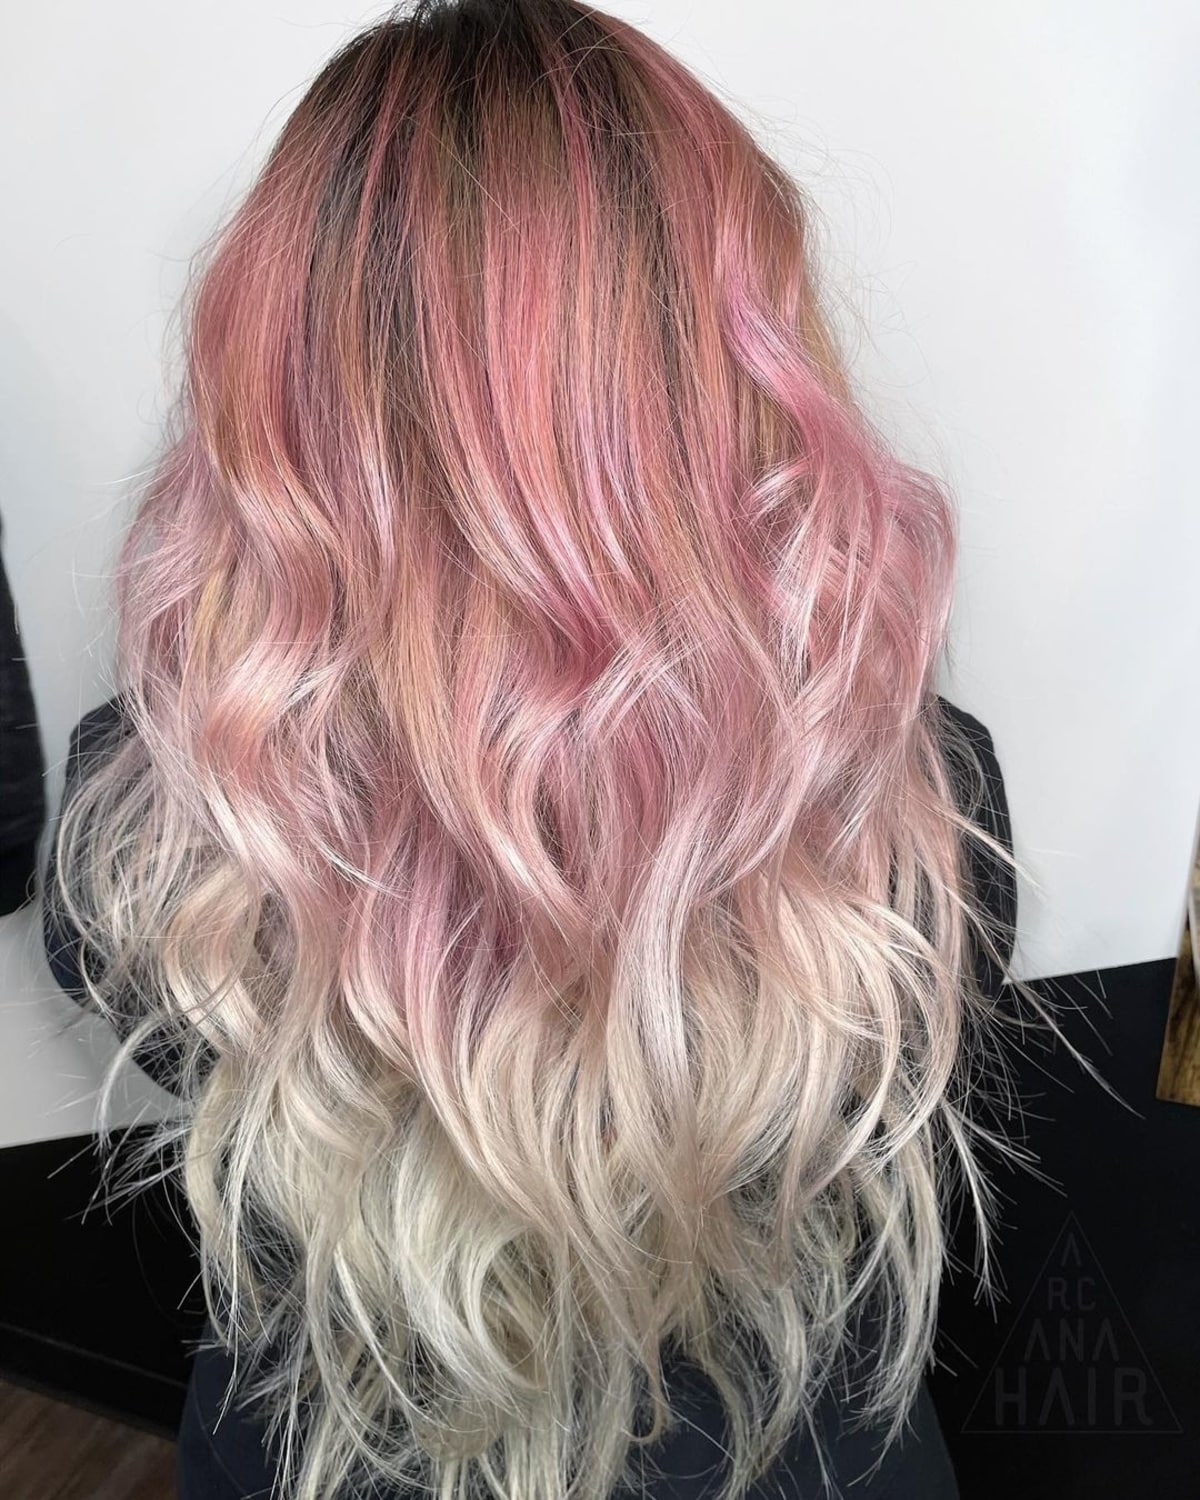 50 Best Rose Gold Hair Color Ideas for Stylish Women